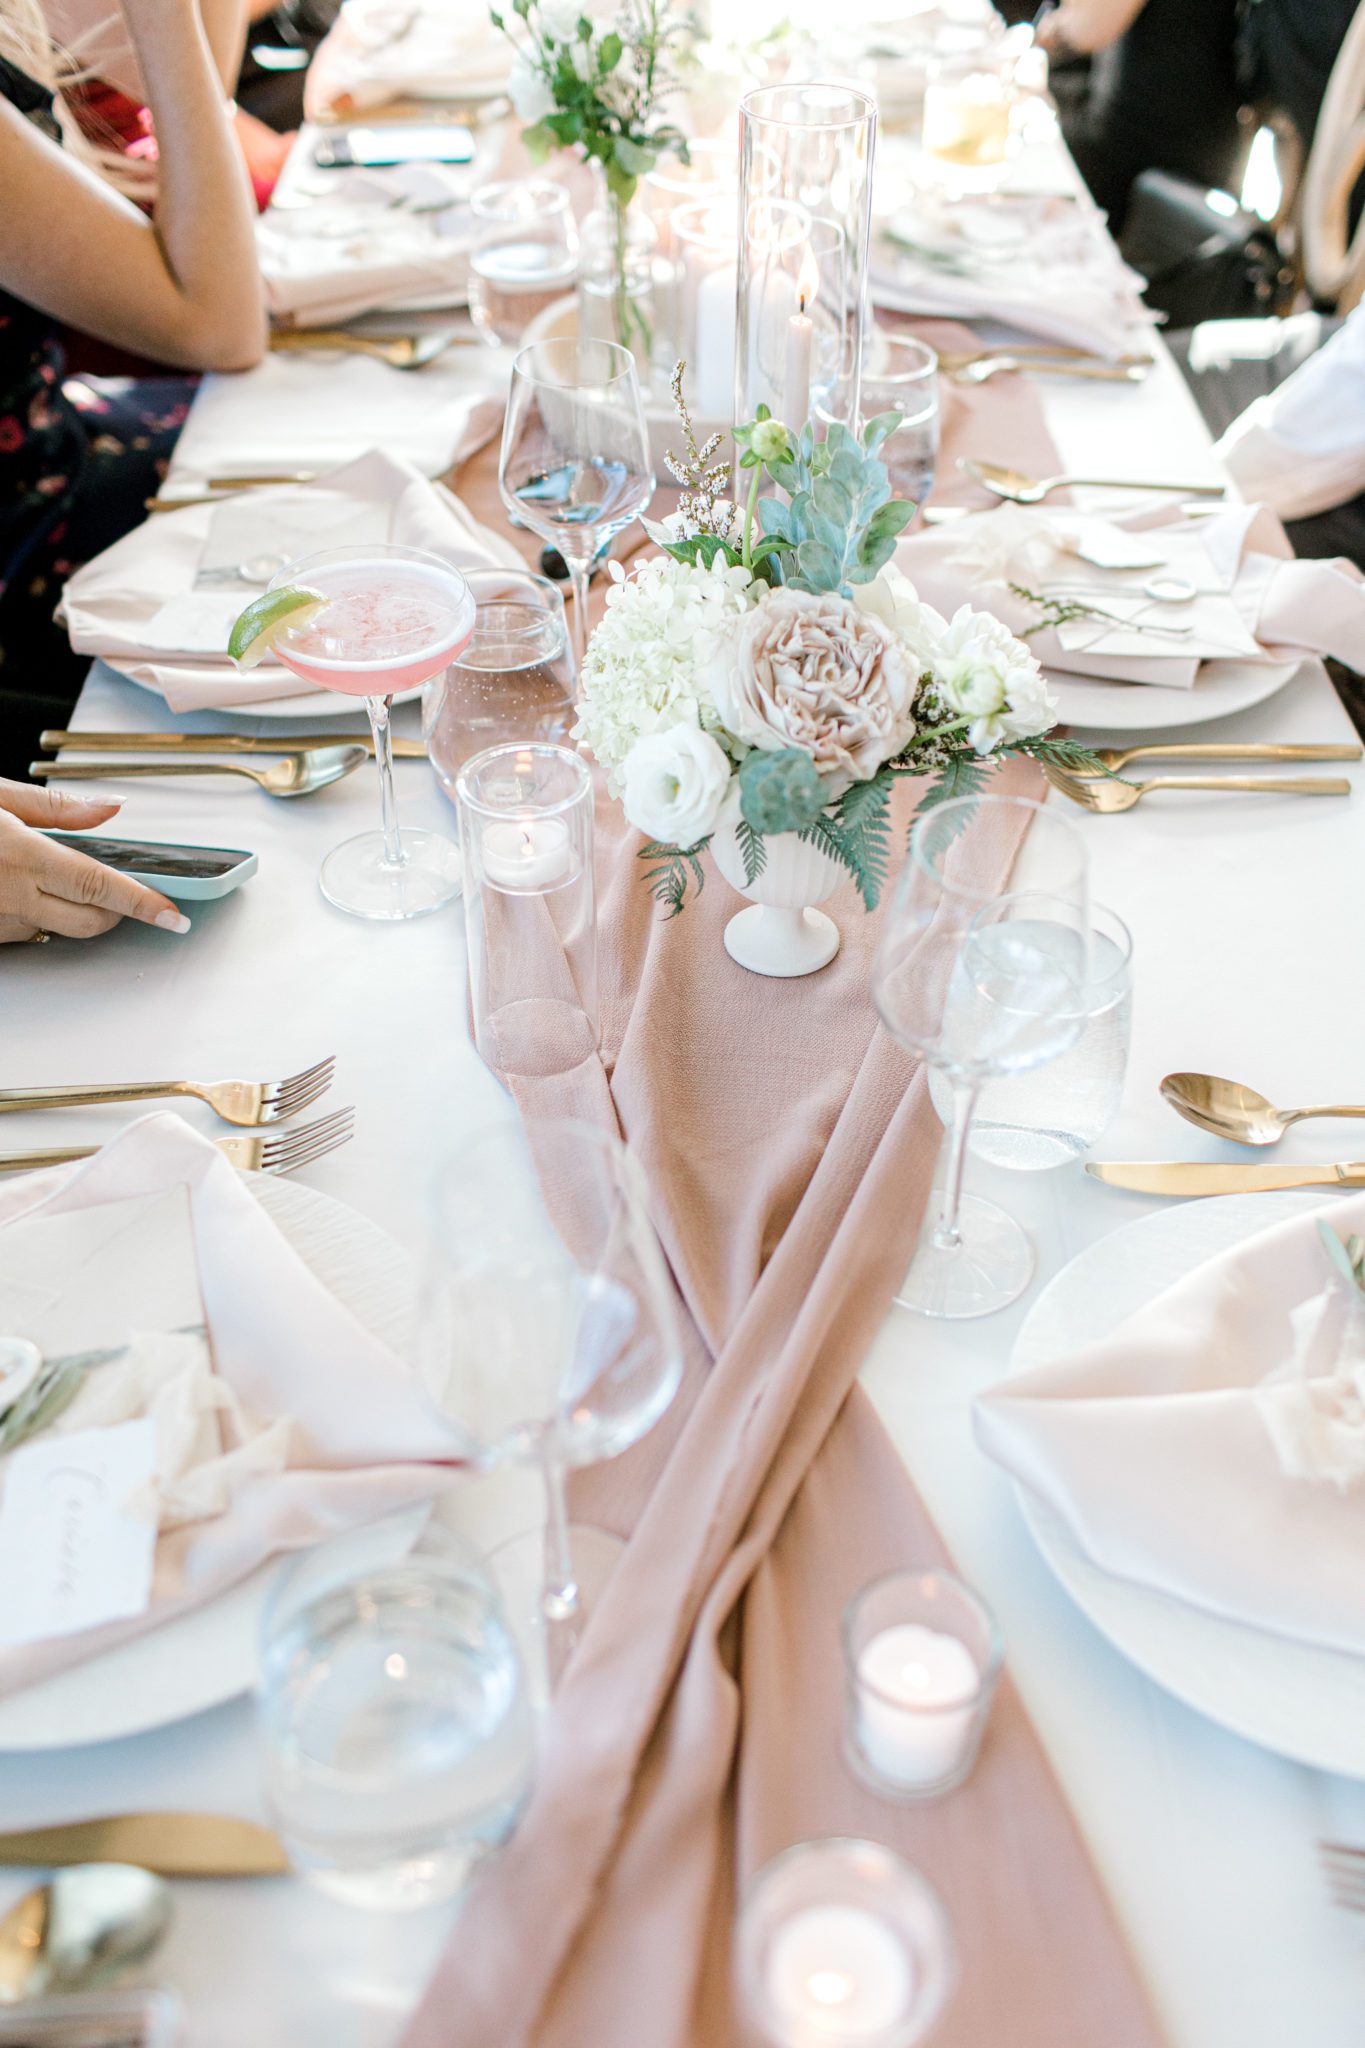 Wedding table photo above showcasing place settings, gold cutlery, blush linens, white and green florals and greenery, altogether a classic yet modern wedding table design at The Sensory in Canmore Alberta